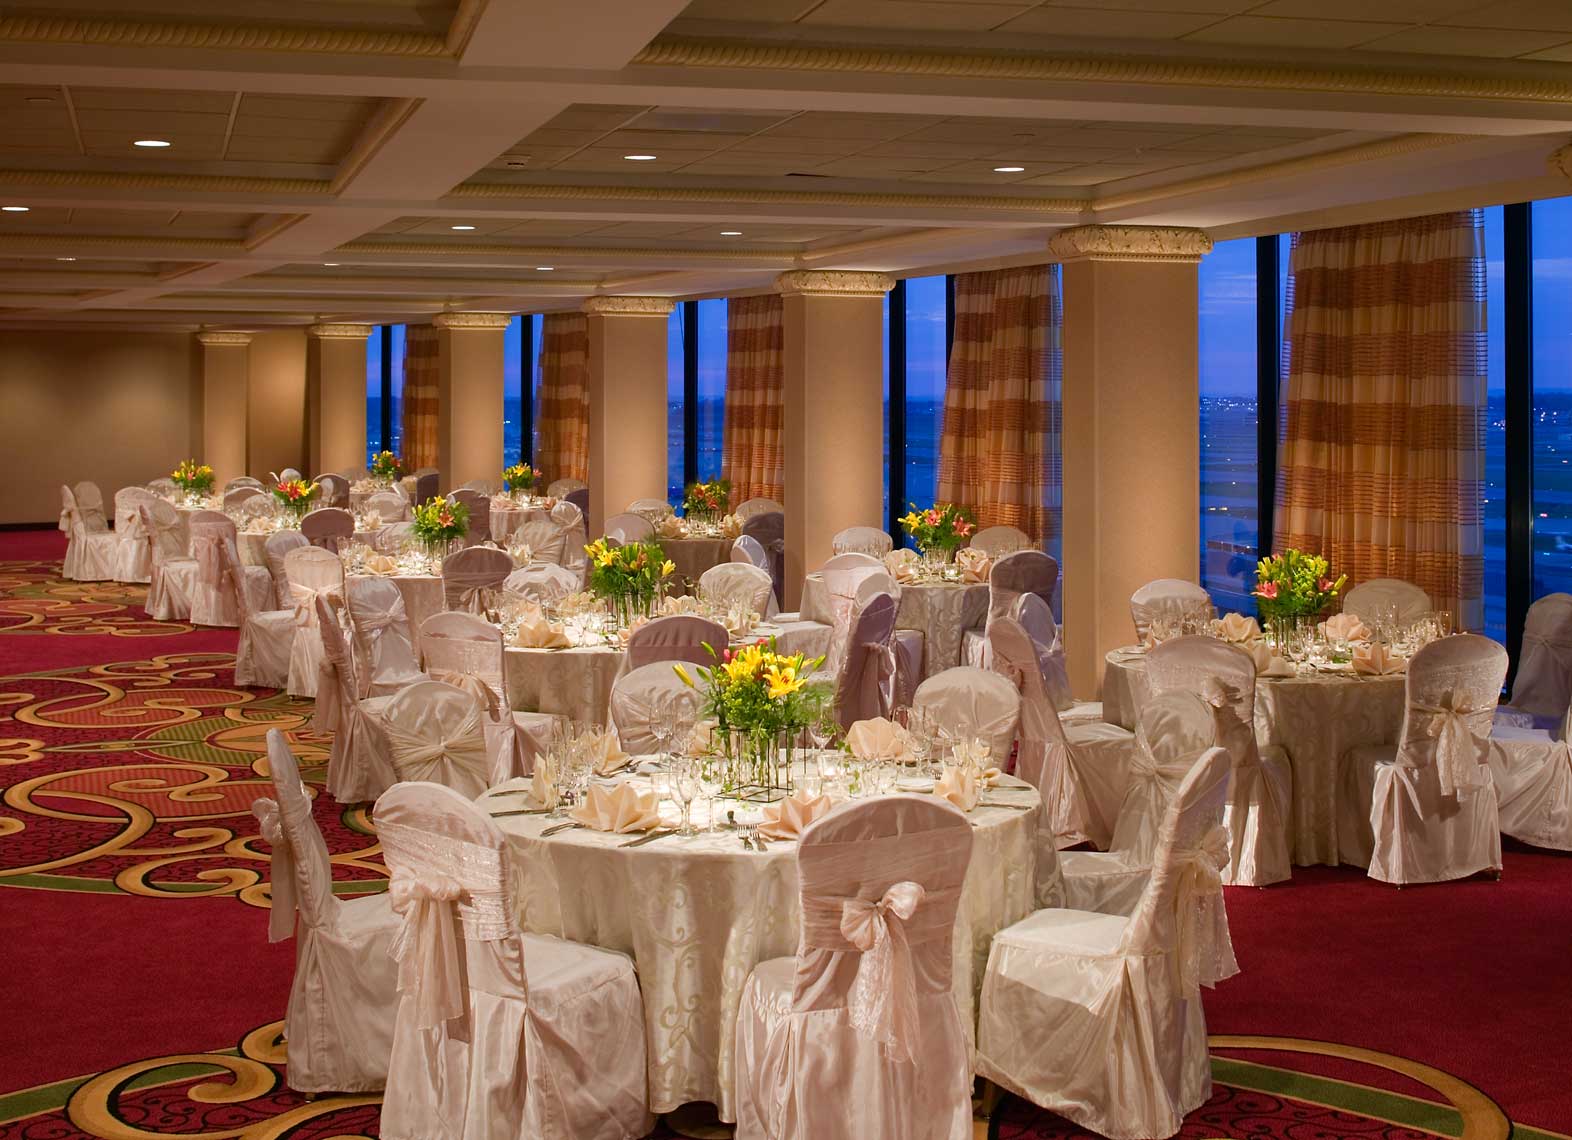 A view of the ballroom at the Renaissance Hotel St. Louis Airport with formal reception seating